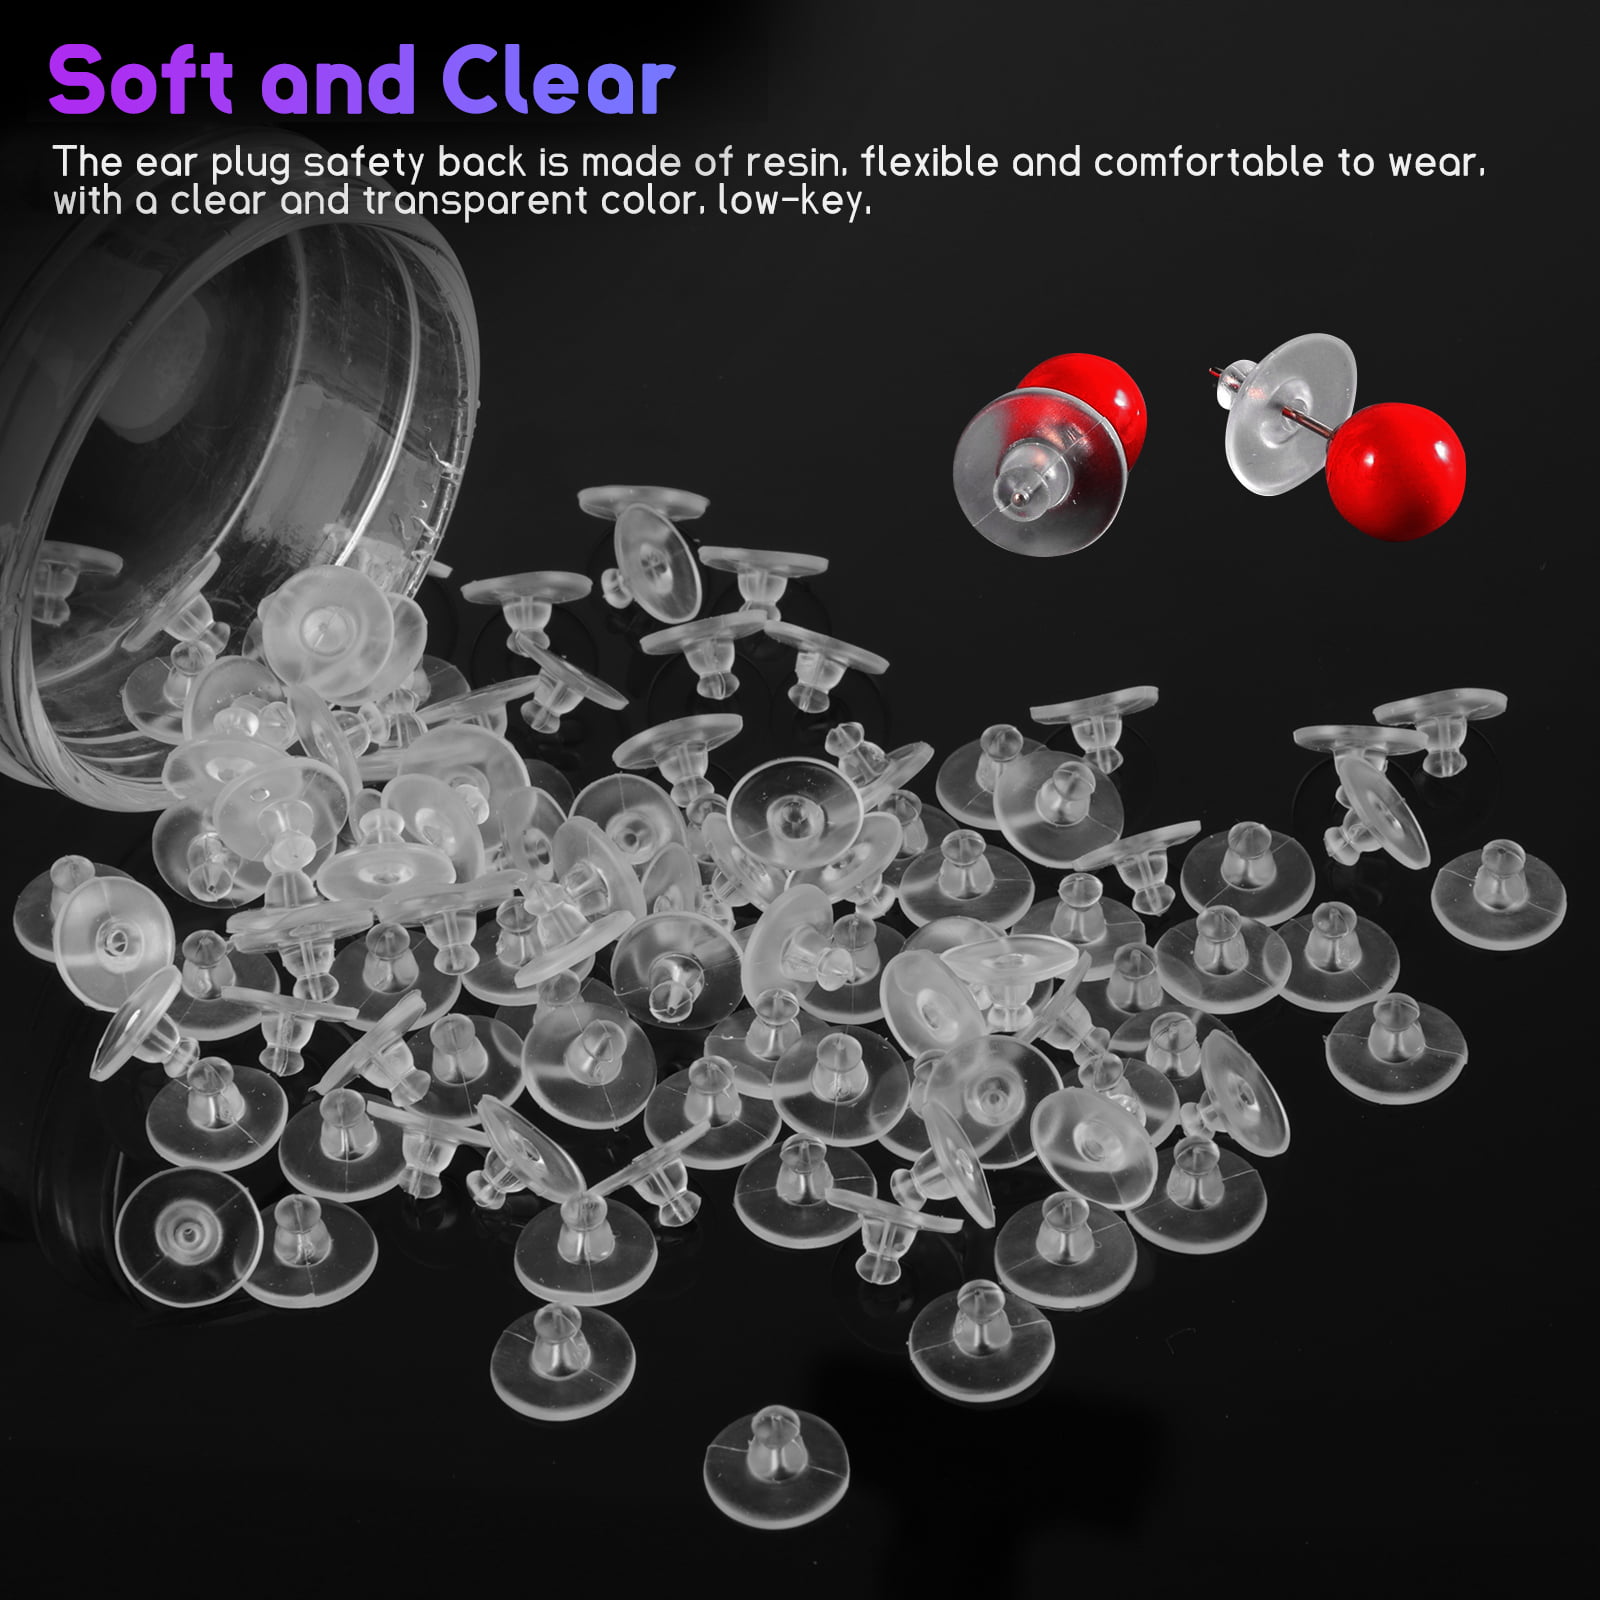 100pcs Silicone Earring Backs Clear Soft Rubber Ear Stud Blocked